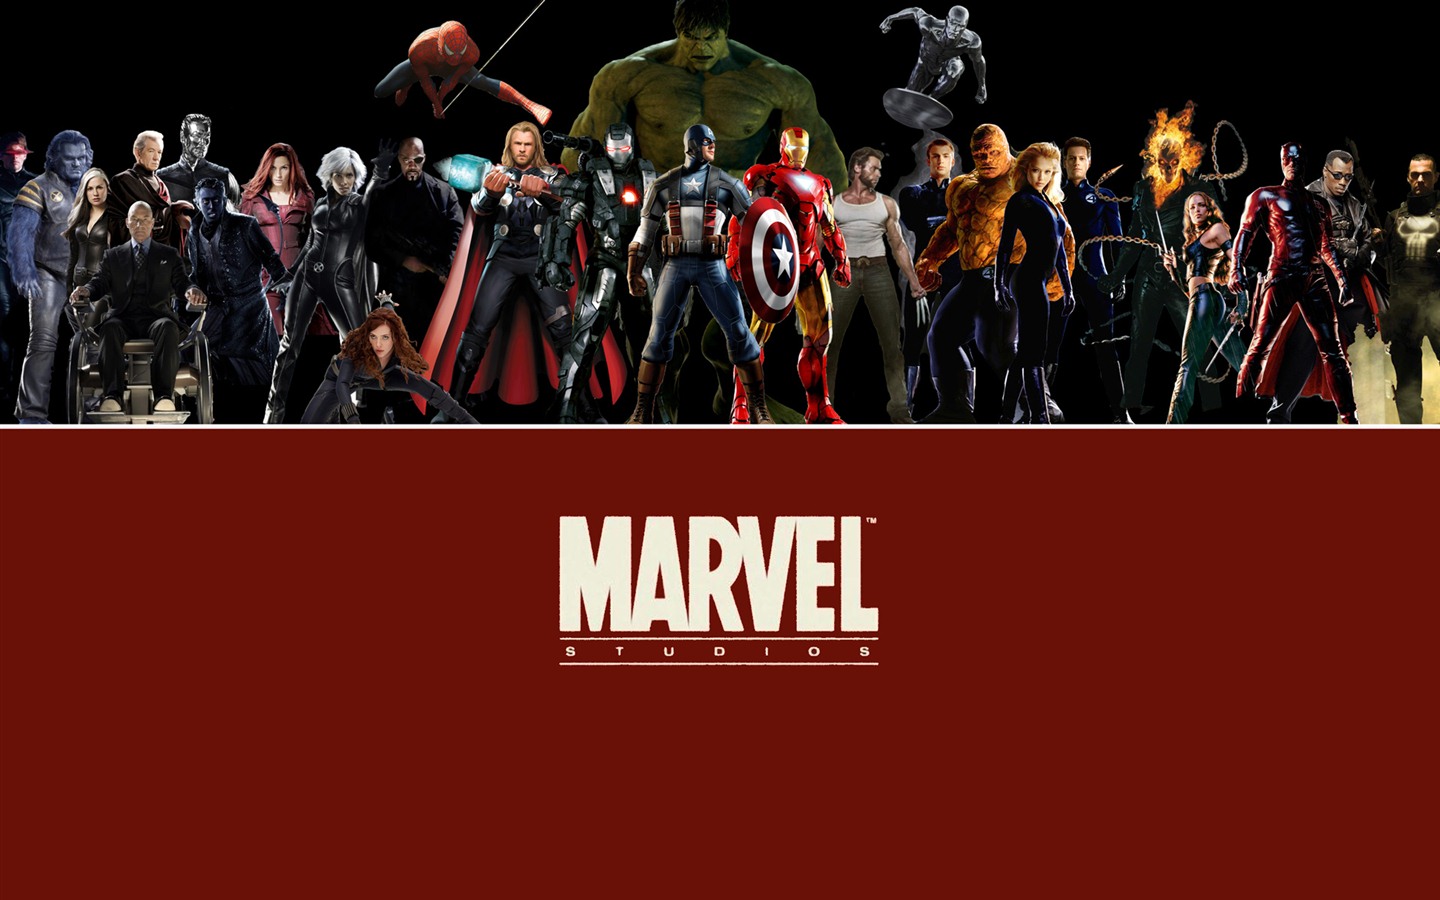 The Avengers 2012 HD wallpapers #8 - 1440x900